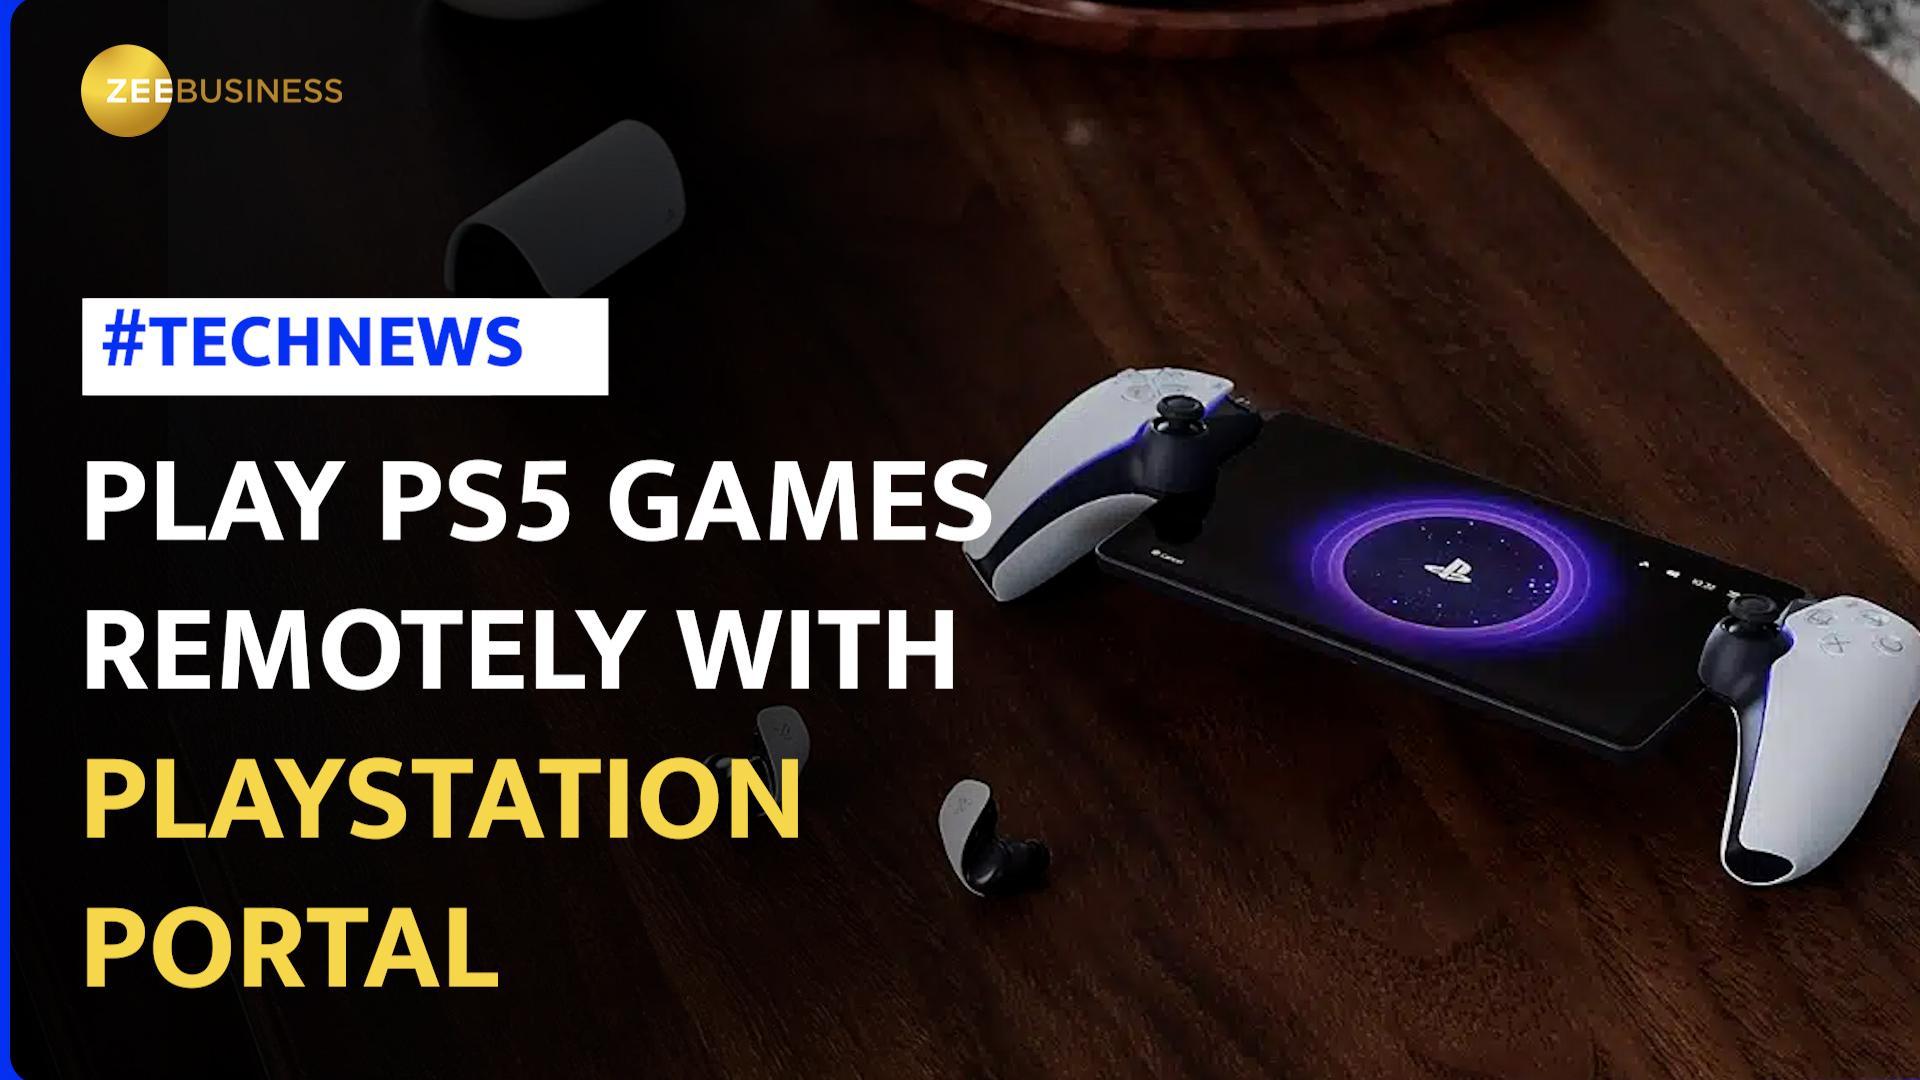 PlayStation Portal: The controller with a screen is surprisingly awesome